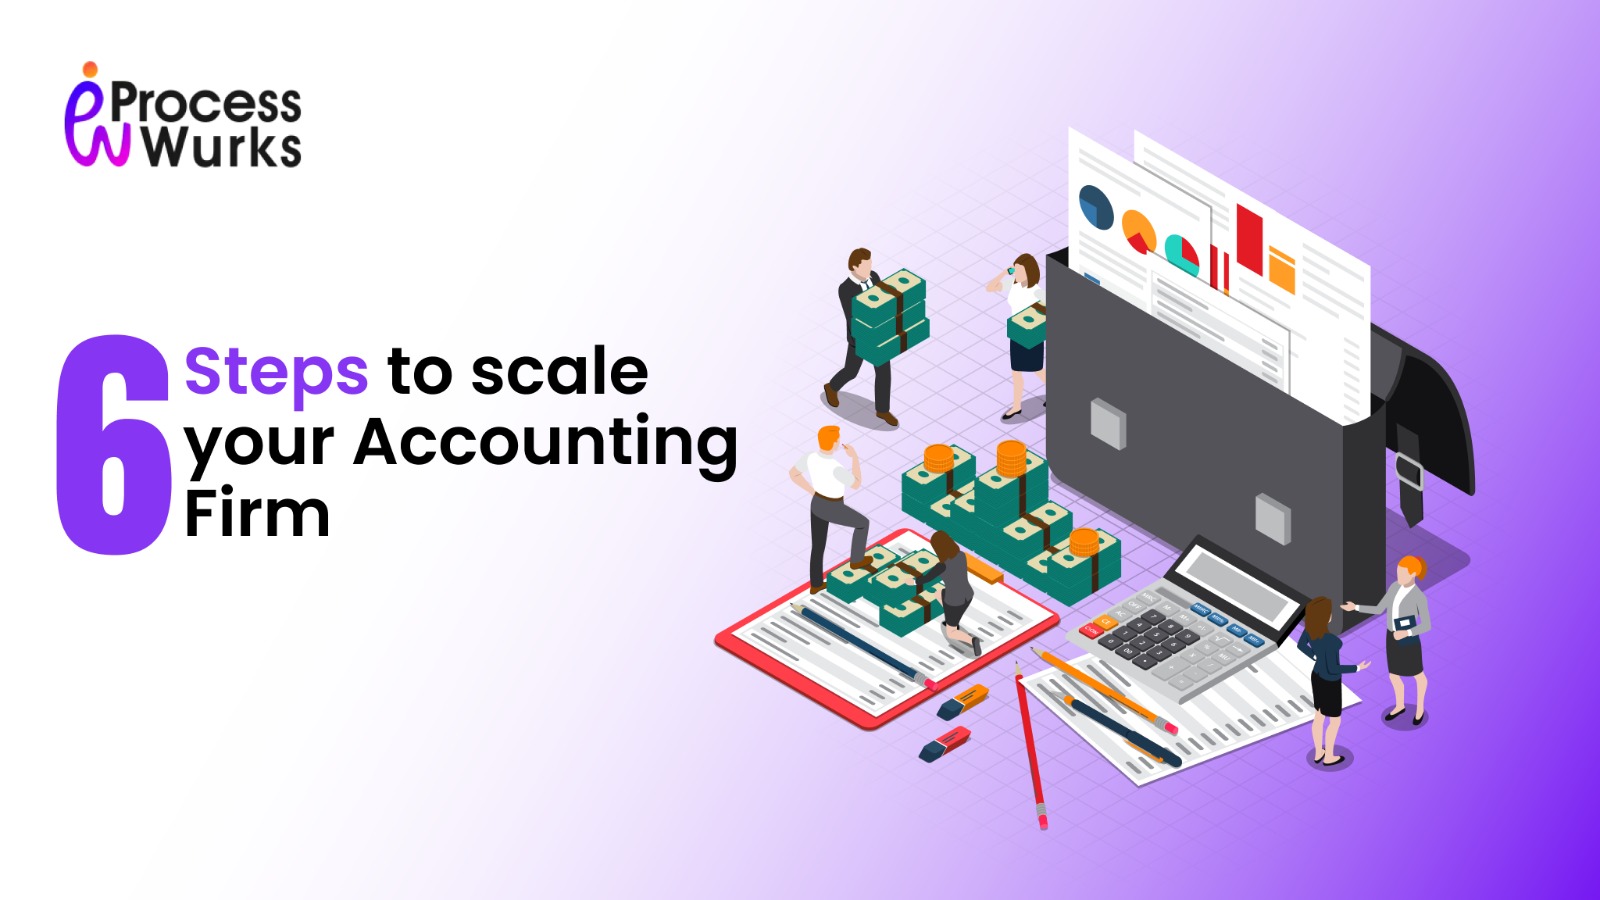 6 Steps to scale your Accounting Firm